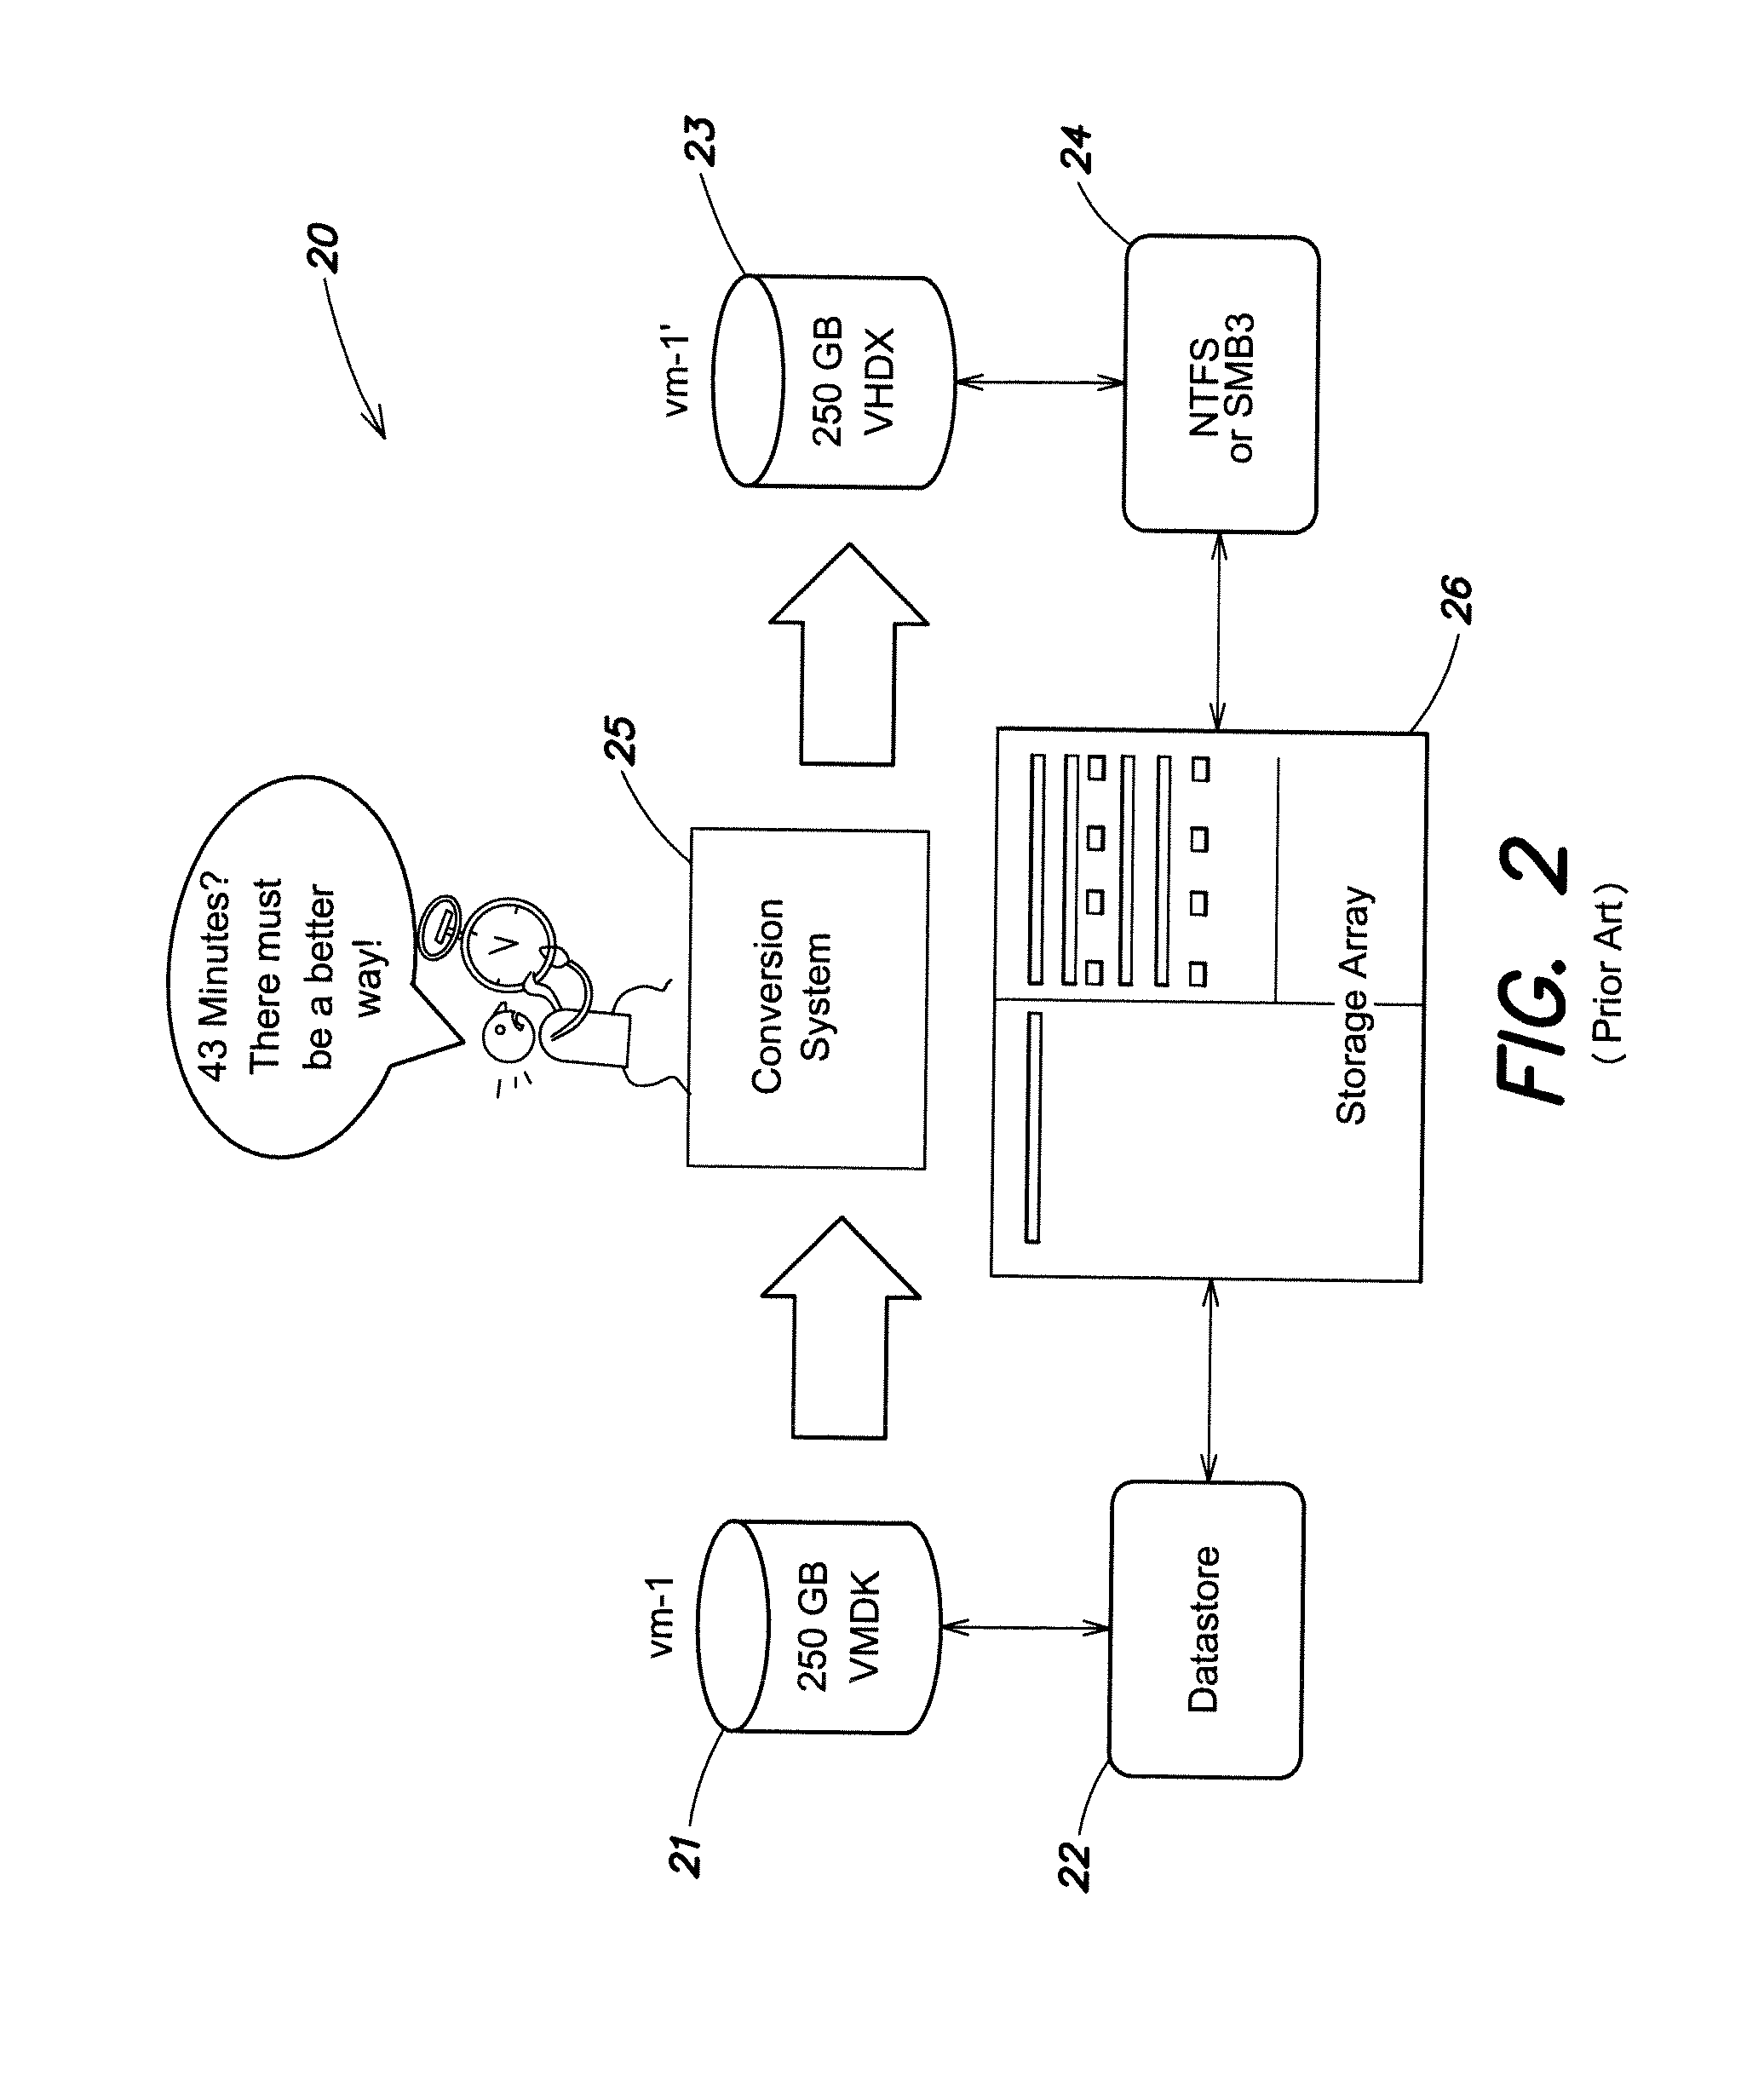 System and method for virtual machine conversion